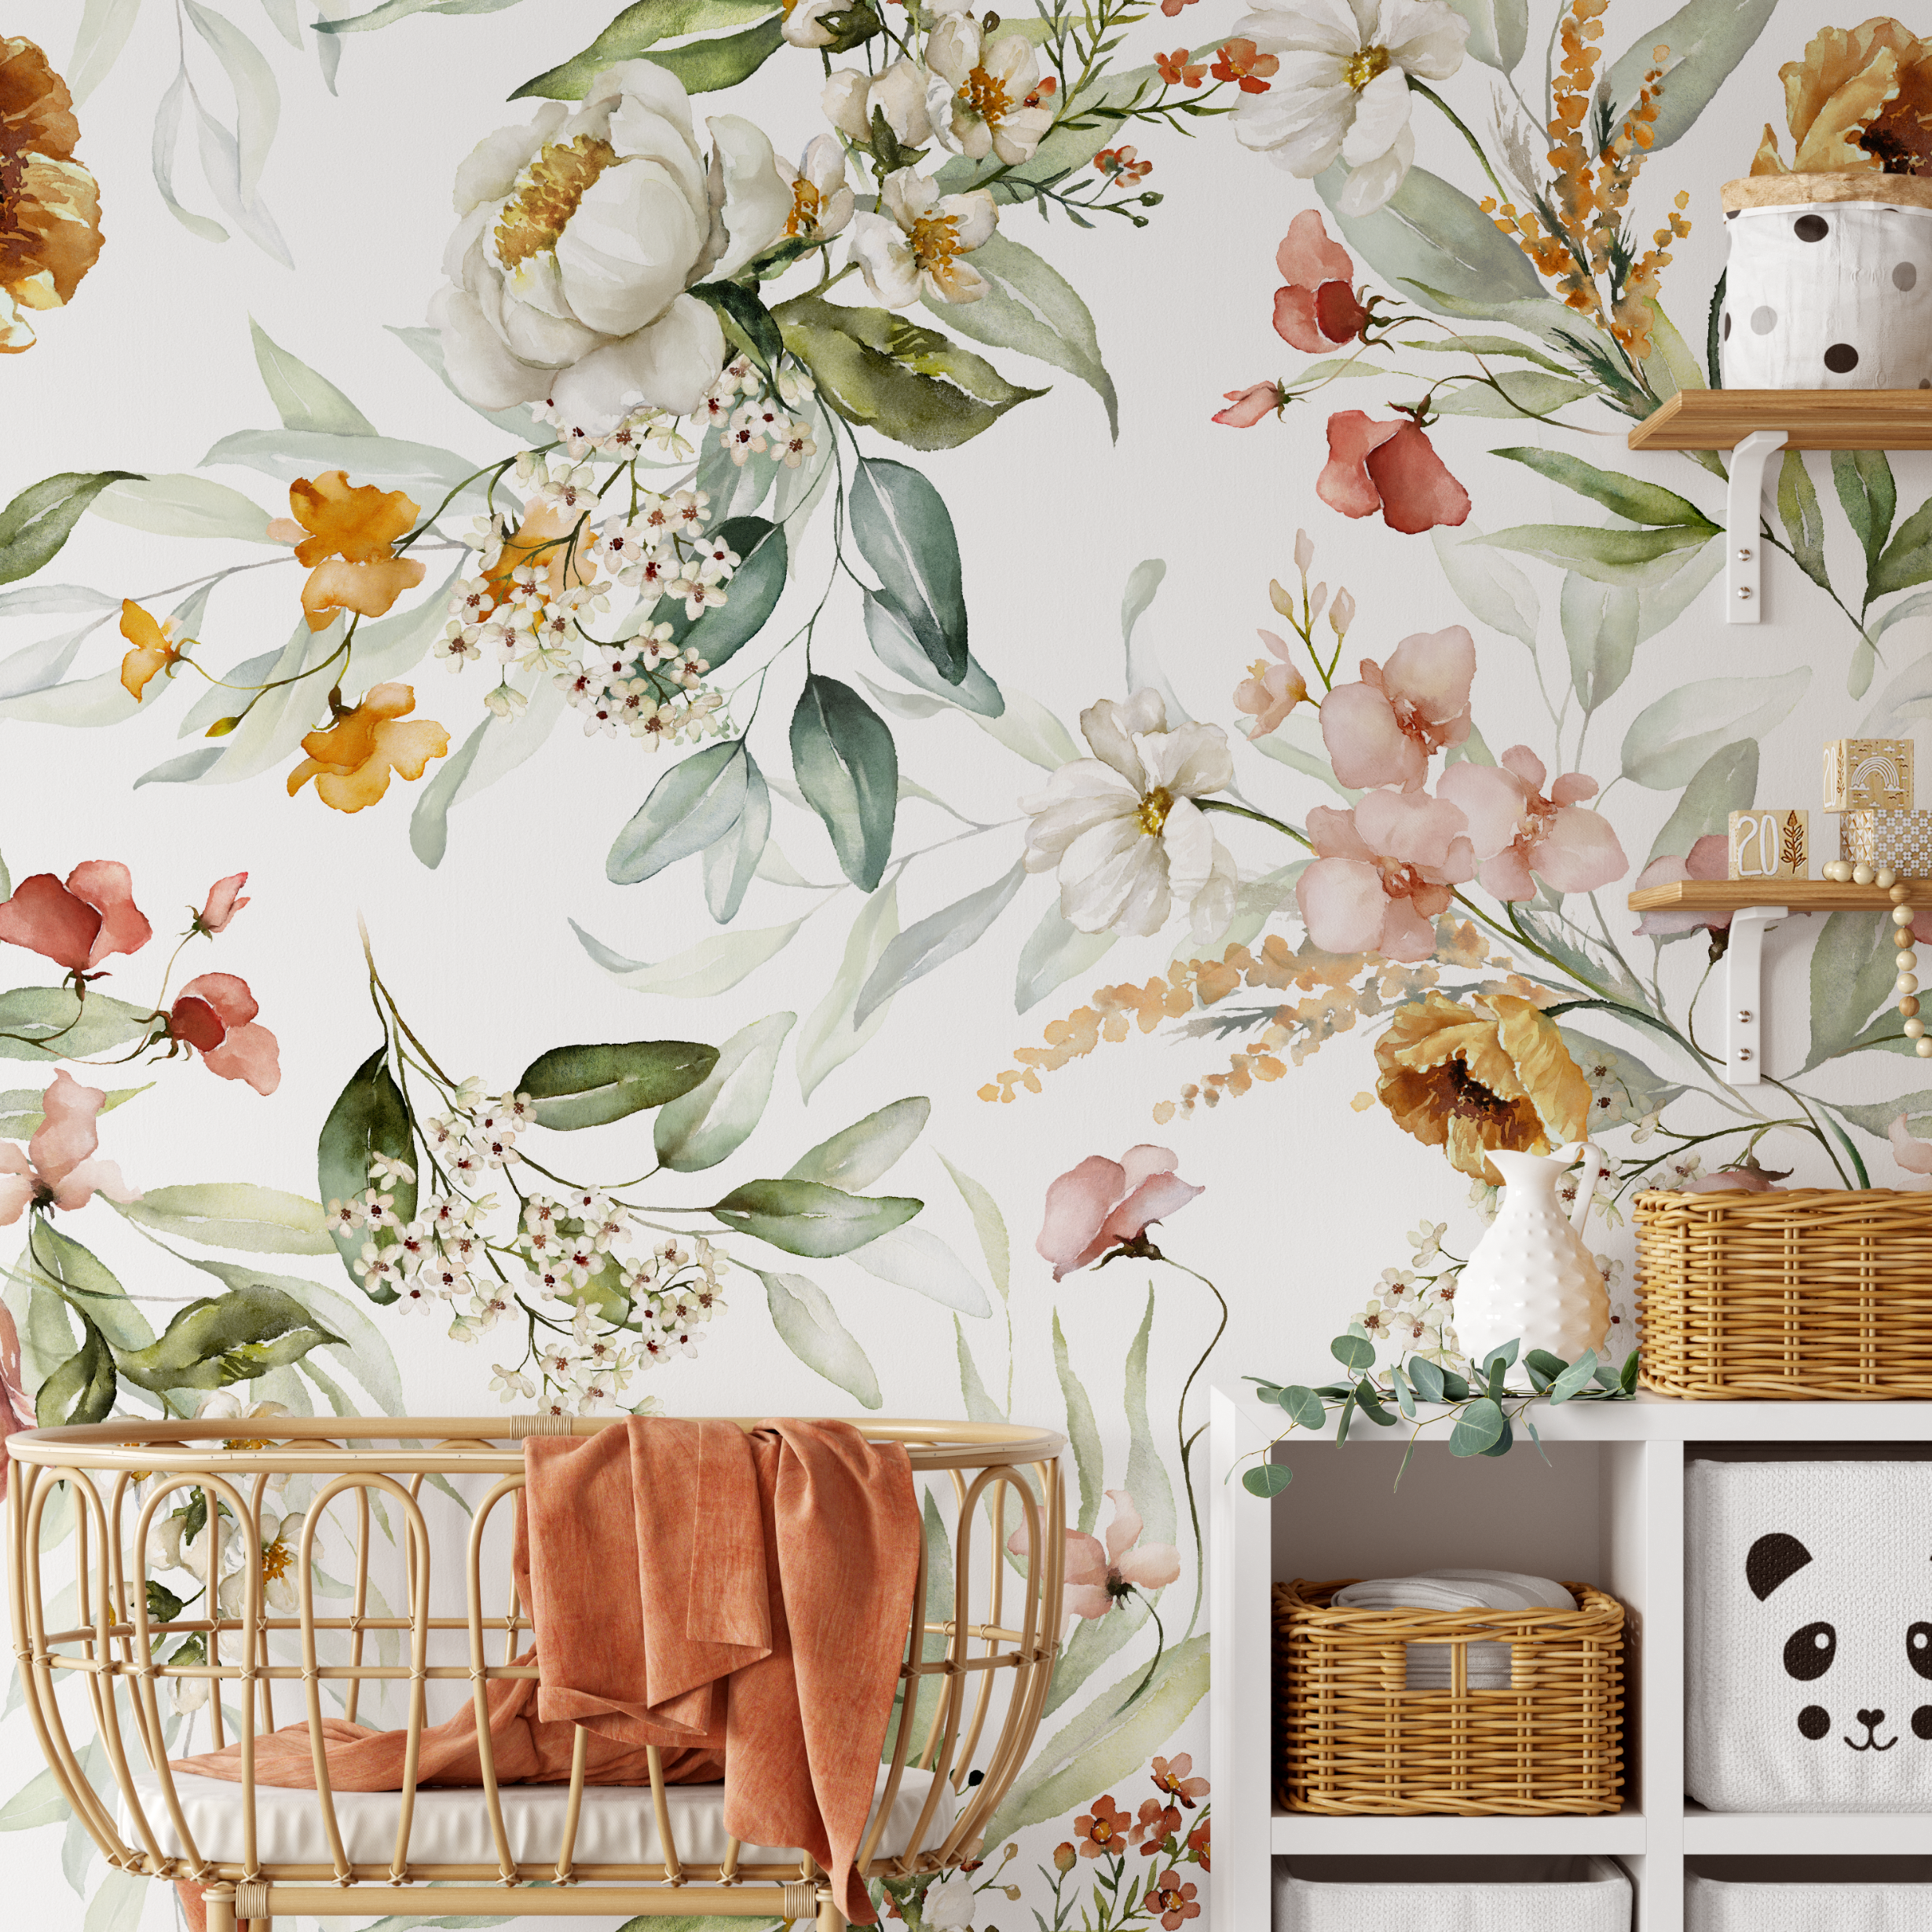 A charming nursery corner with Watercolour Bright Floral Wallpaper adorned with a variety of colorful flowers and leaves. The space includes a wicker bassinet and white shelves, creating a warm and welcoming environment.